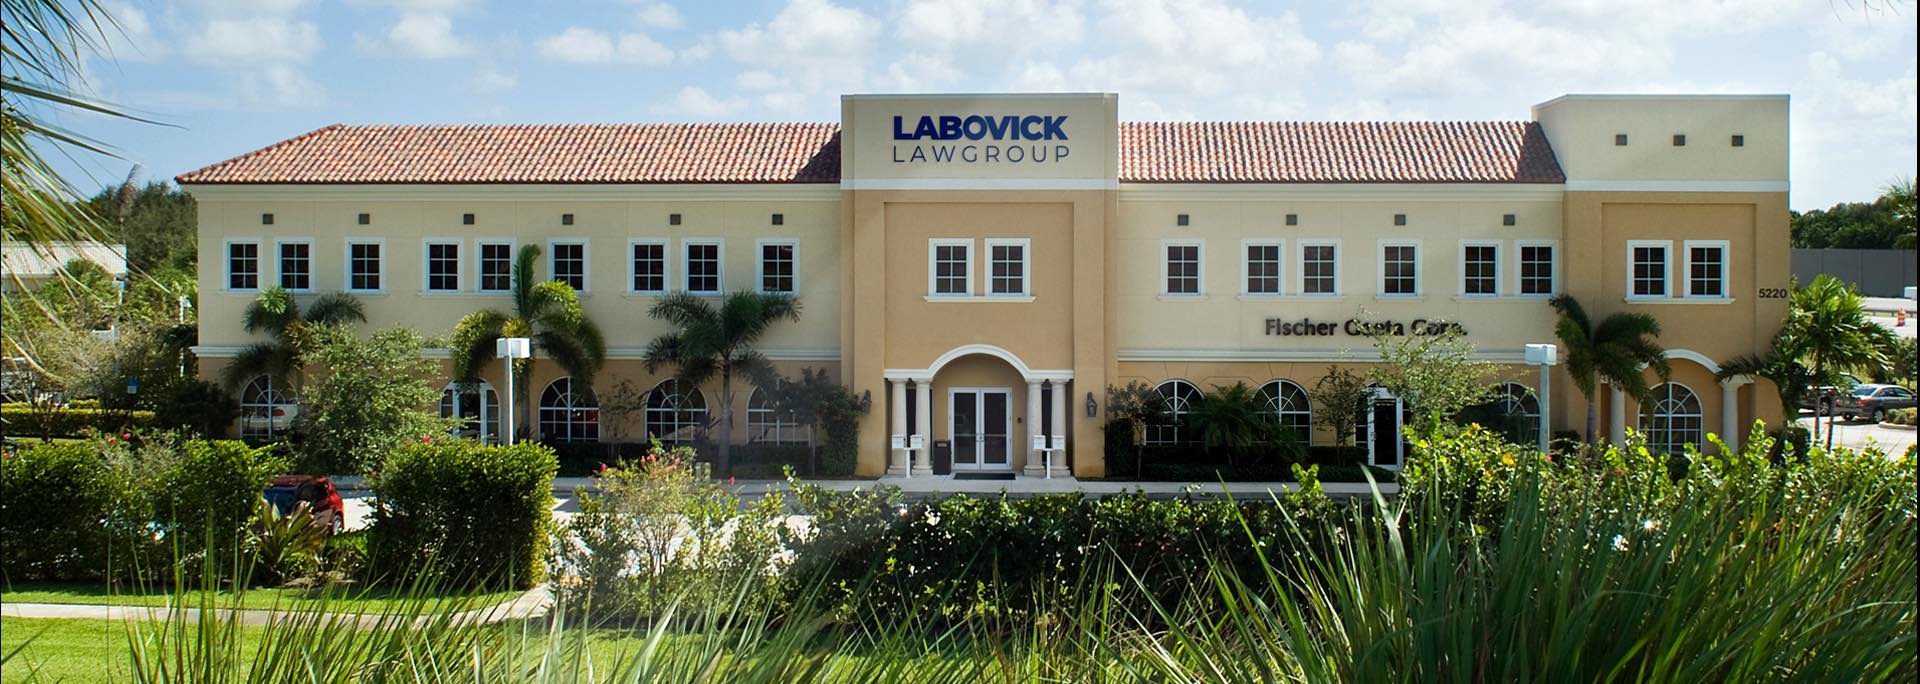 Labovick Offices in Florida